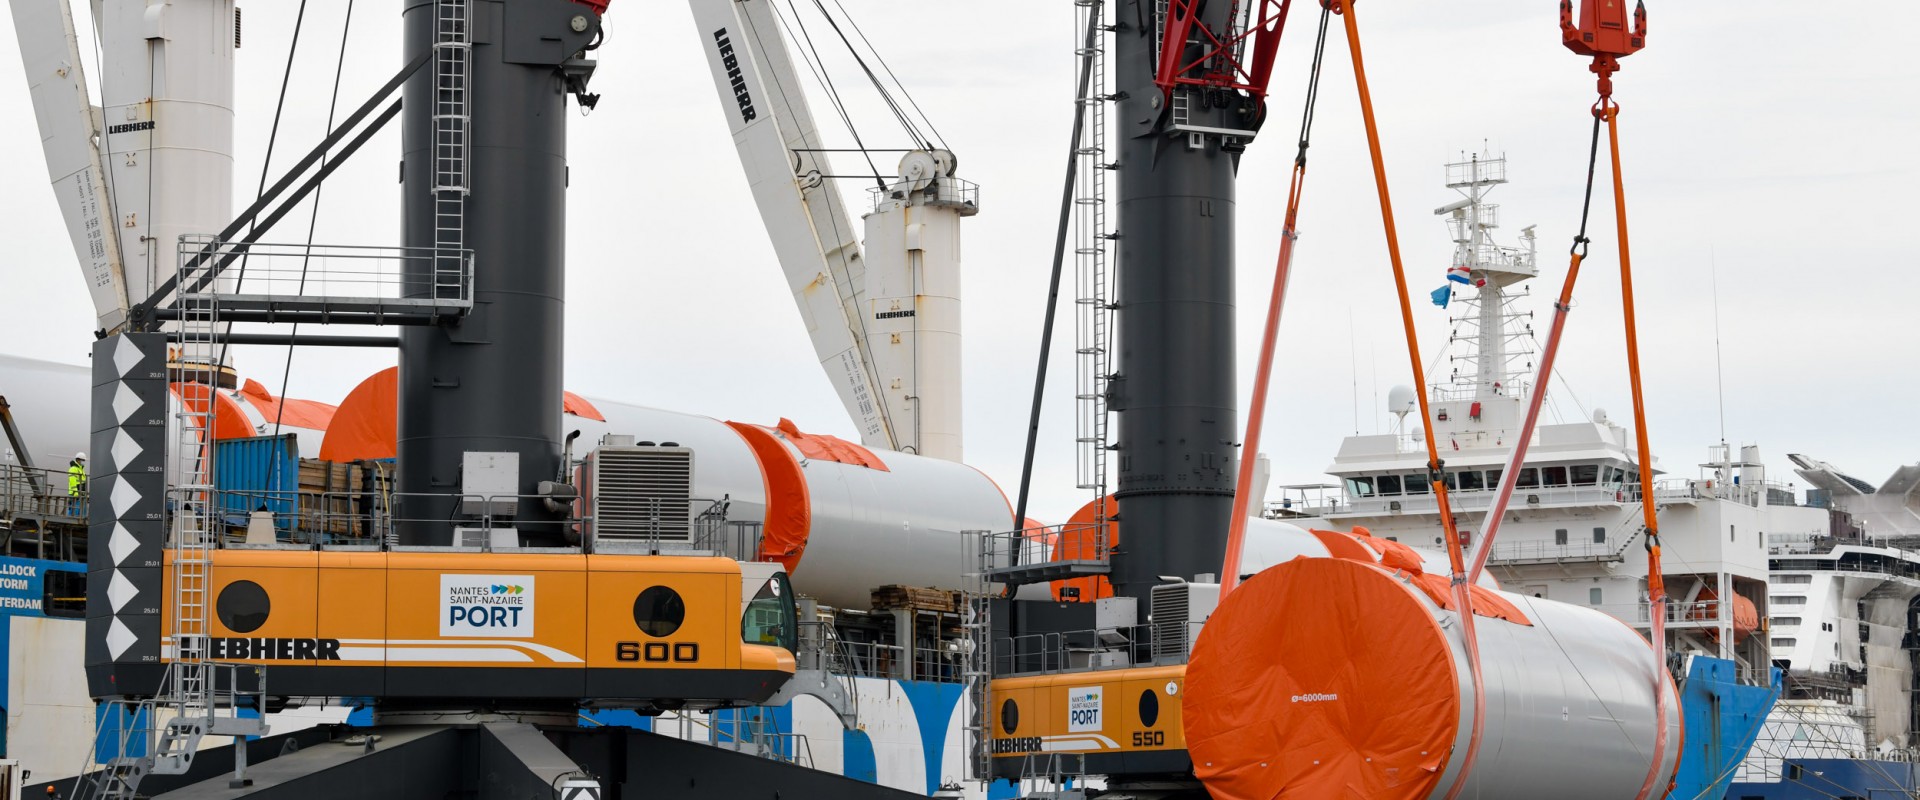 Big Operations at the Port for the Construction of the Offshore Wind Farm